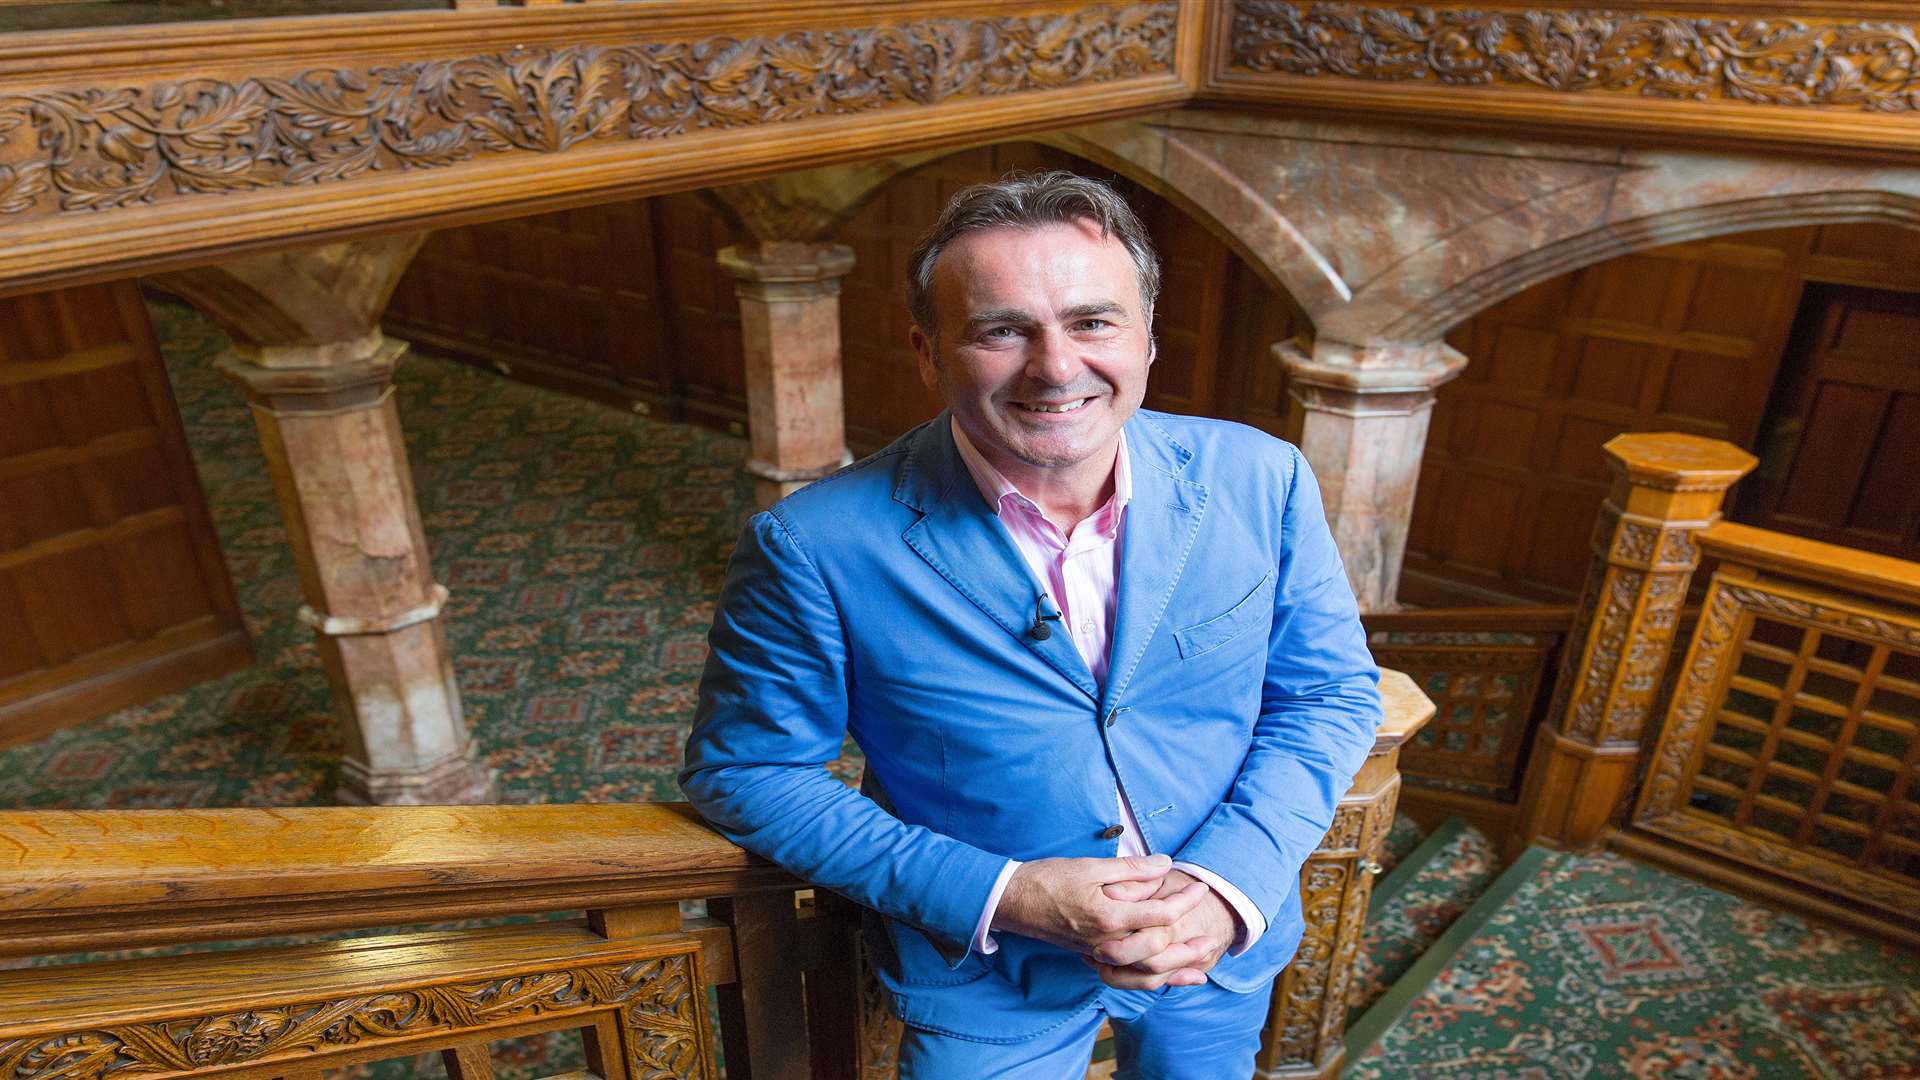 BBC programme Flog It! is coming to Dover Castle